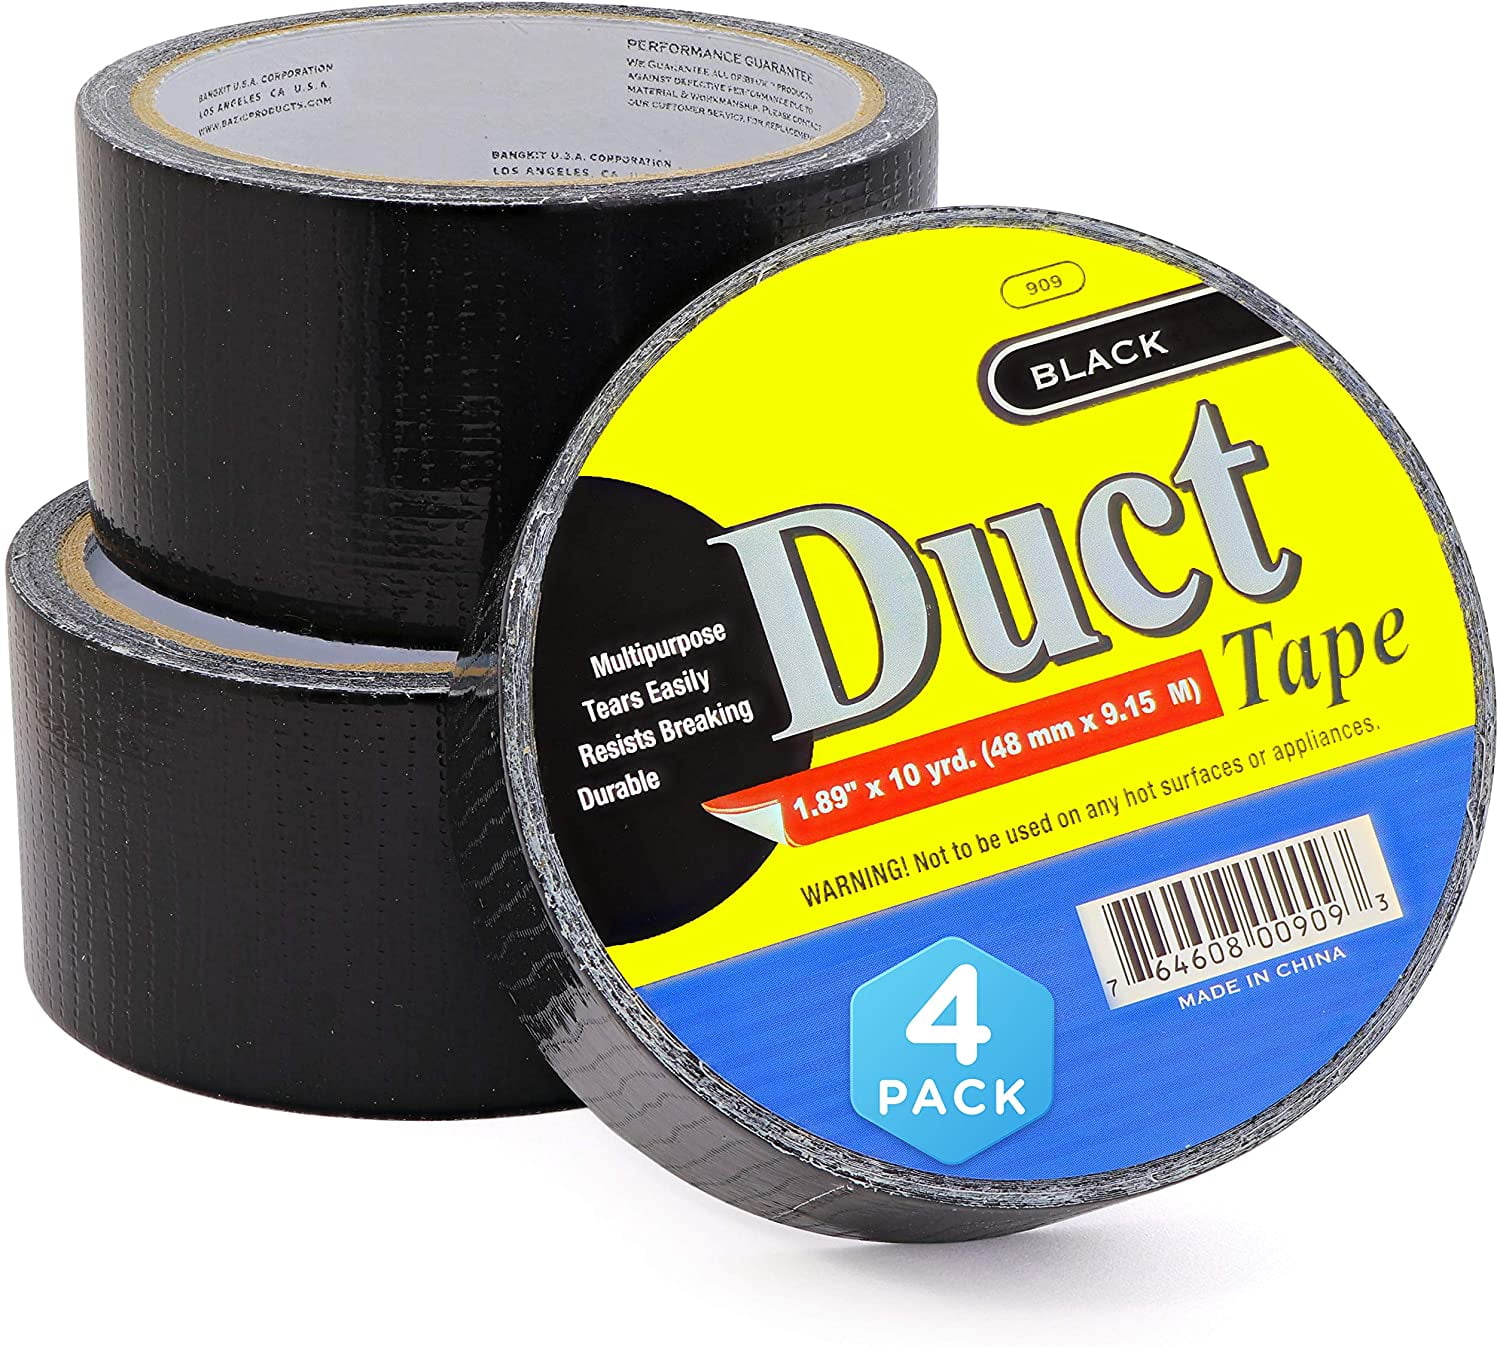 Duct Tape Heavy Duty Black Color Roll| Waterproof, Durable, Multipurpose Utility Strip for Repair and Home Use by Emraw 0028